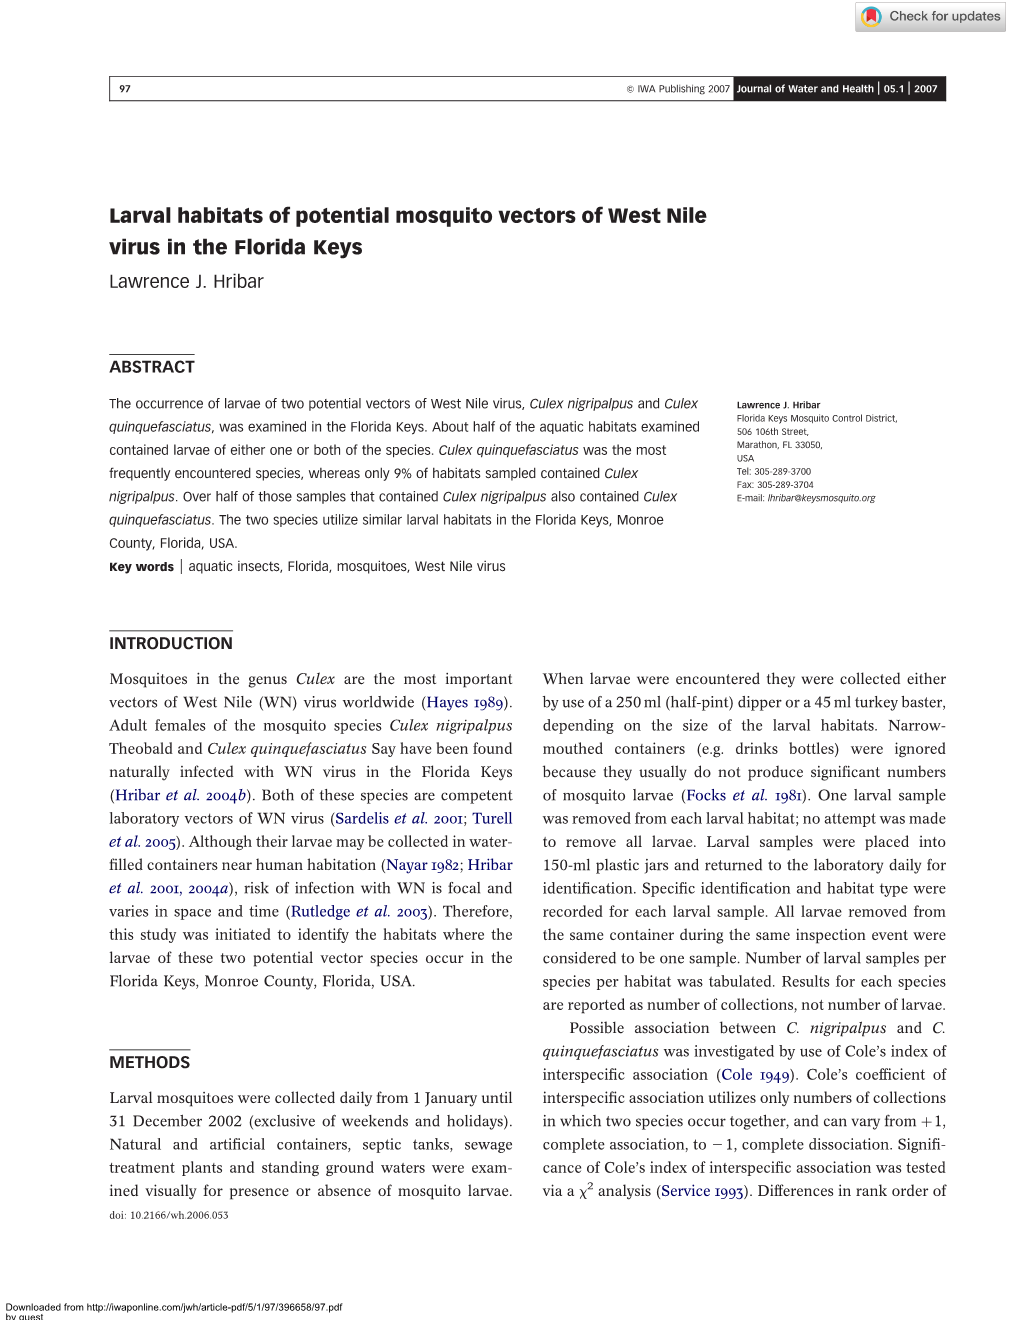 Larval Habitats of Potential Mosquito Vectors of West Nile Virus in the Florida Keys Lawrence J